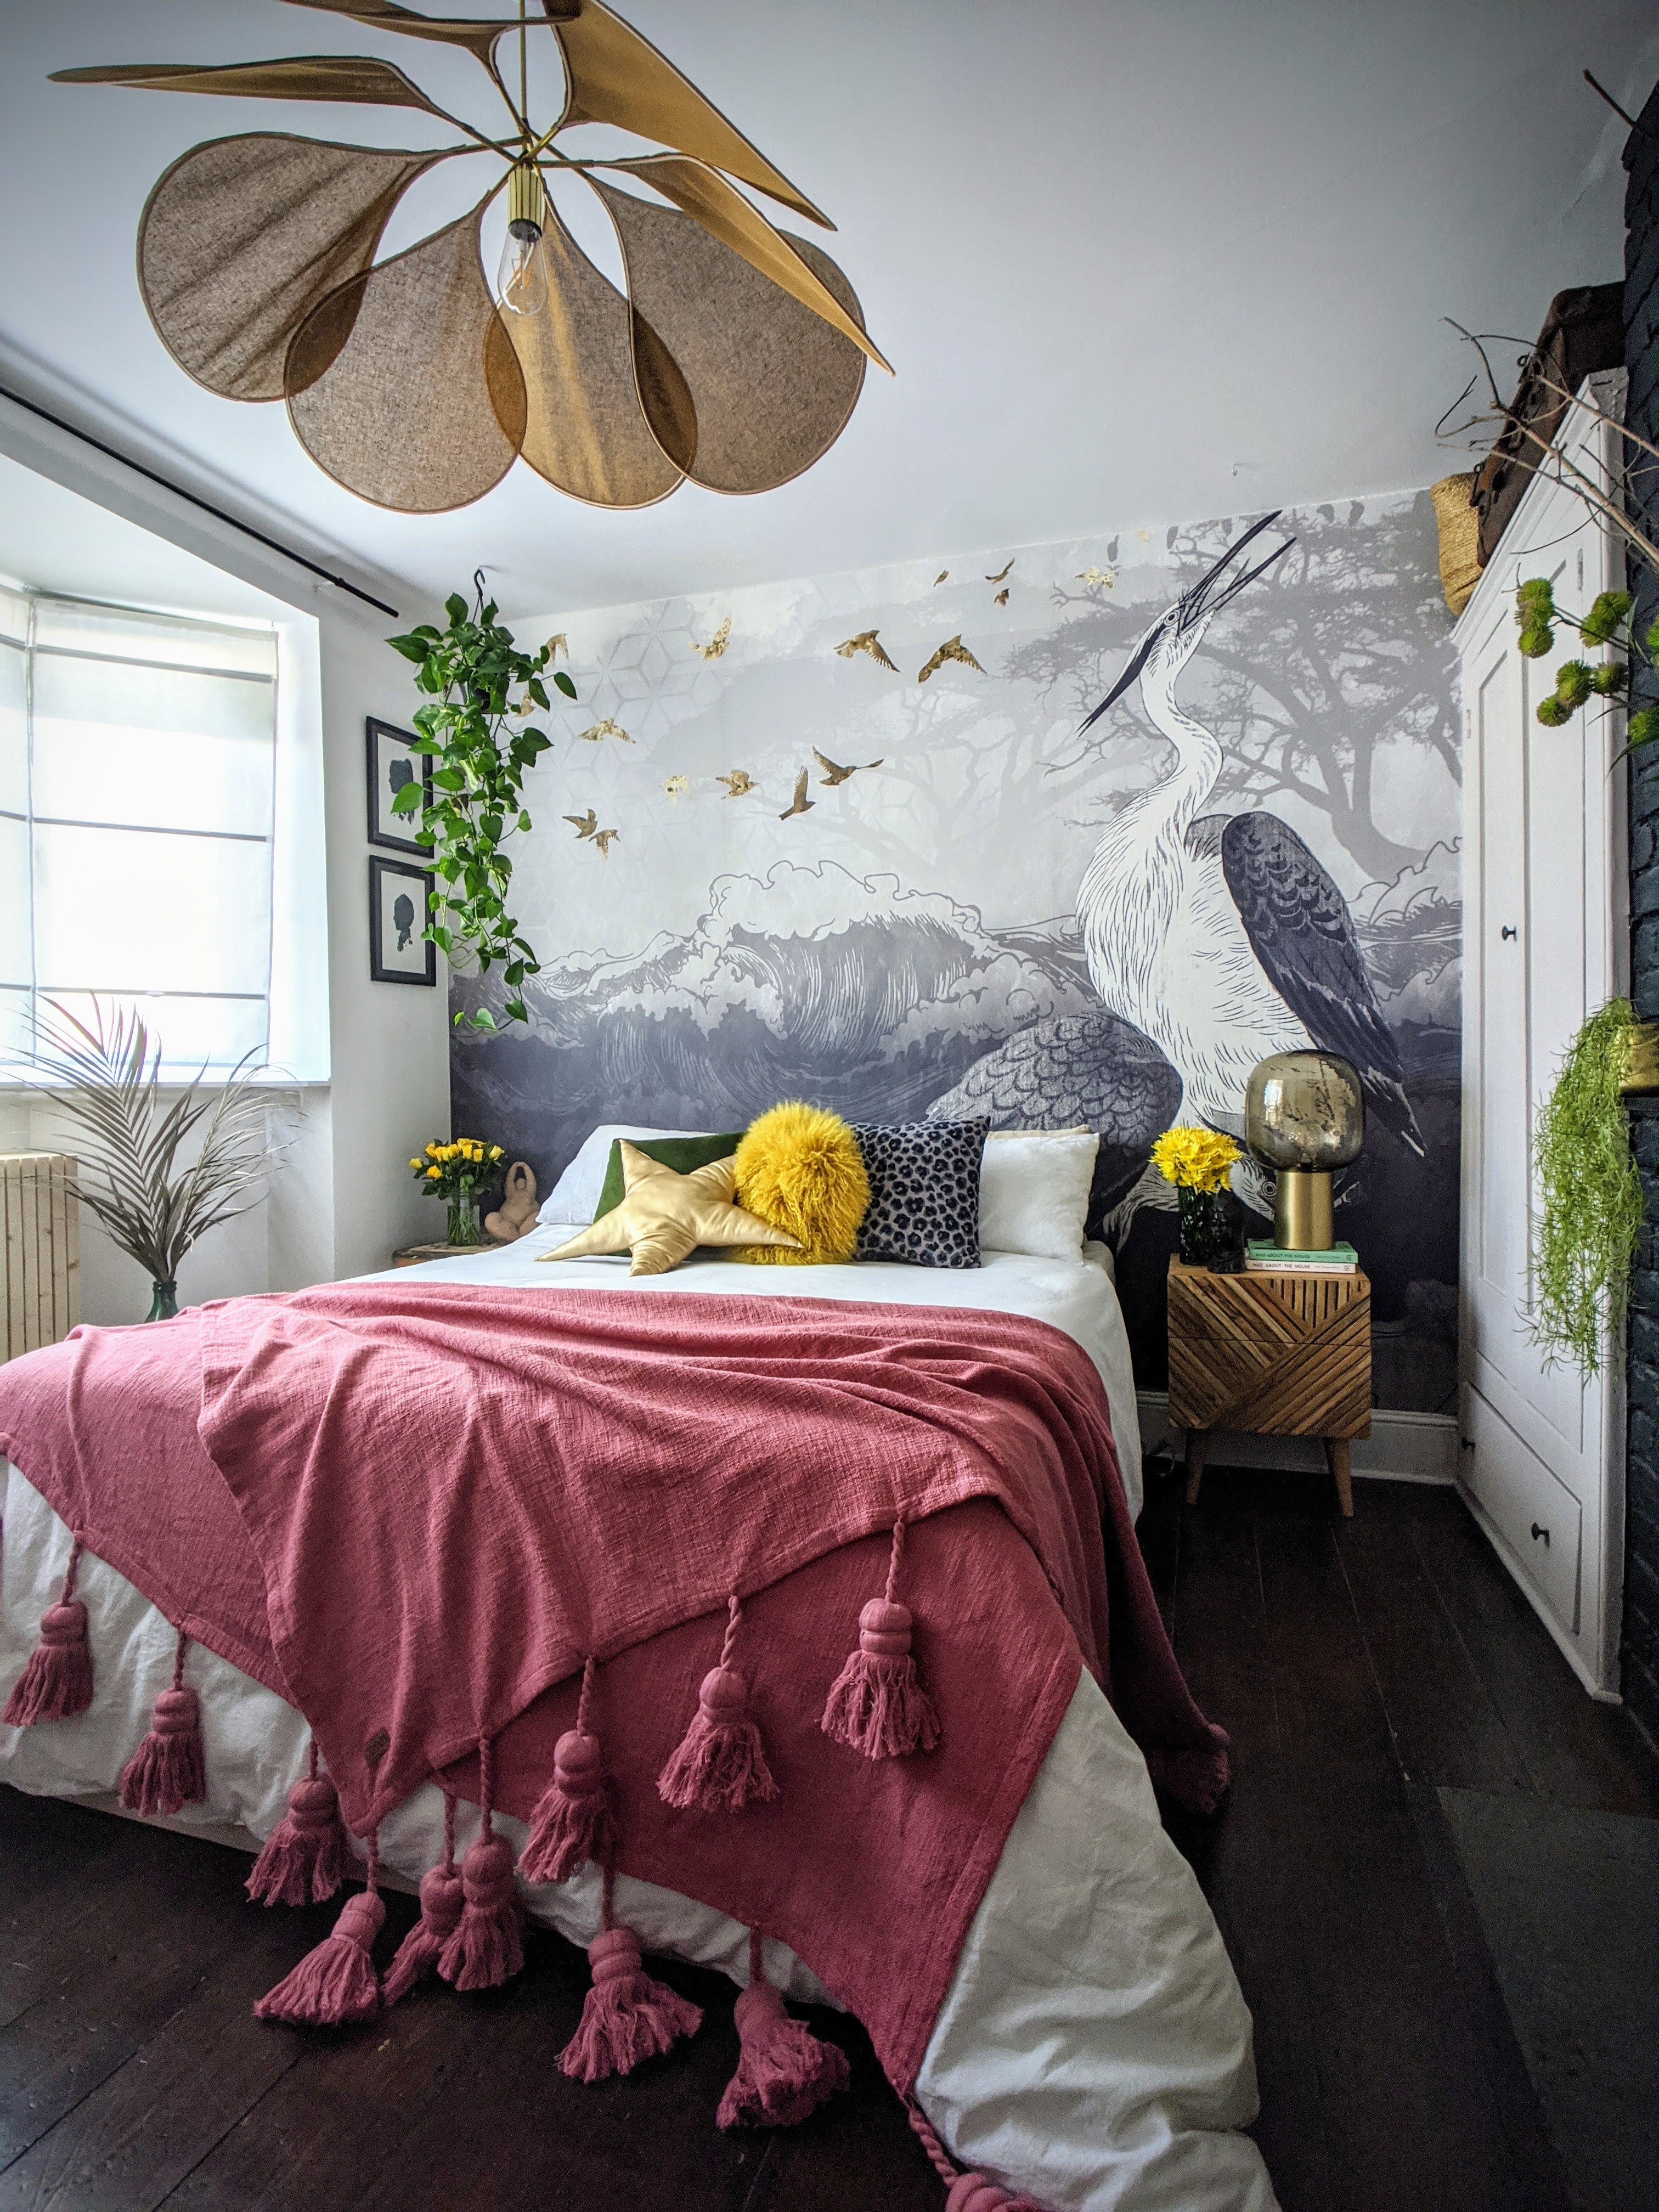 Crane bedroom mural frames bed with hot pink tassel throw and yellow detail